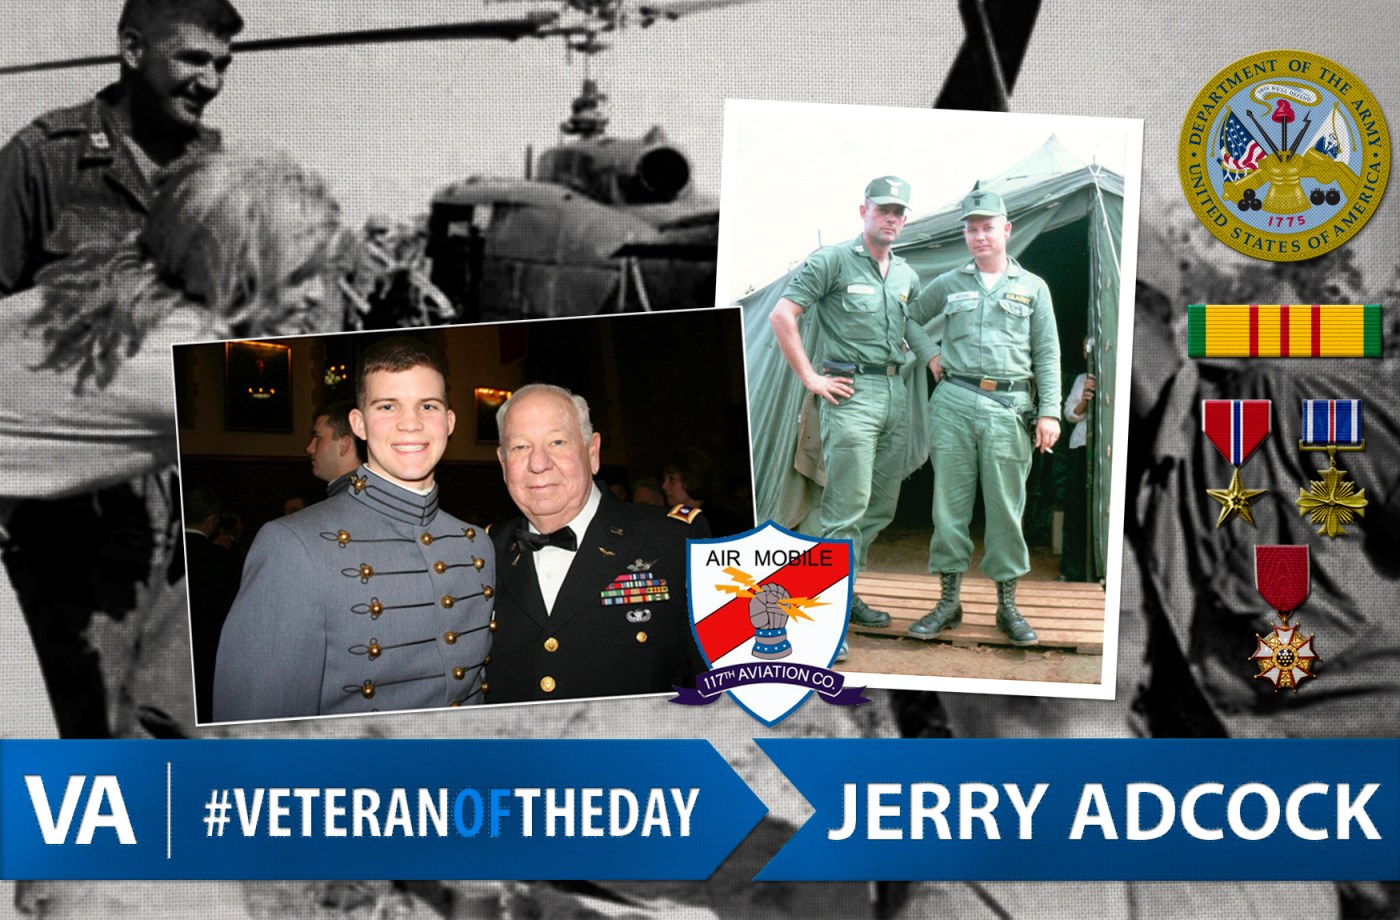 Veteran of the day jerry adcock